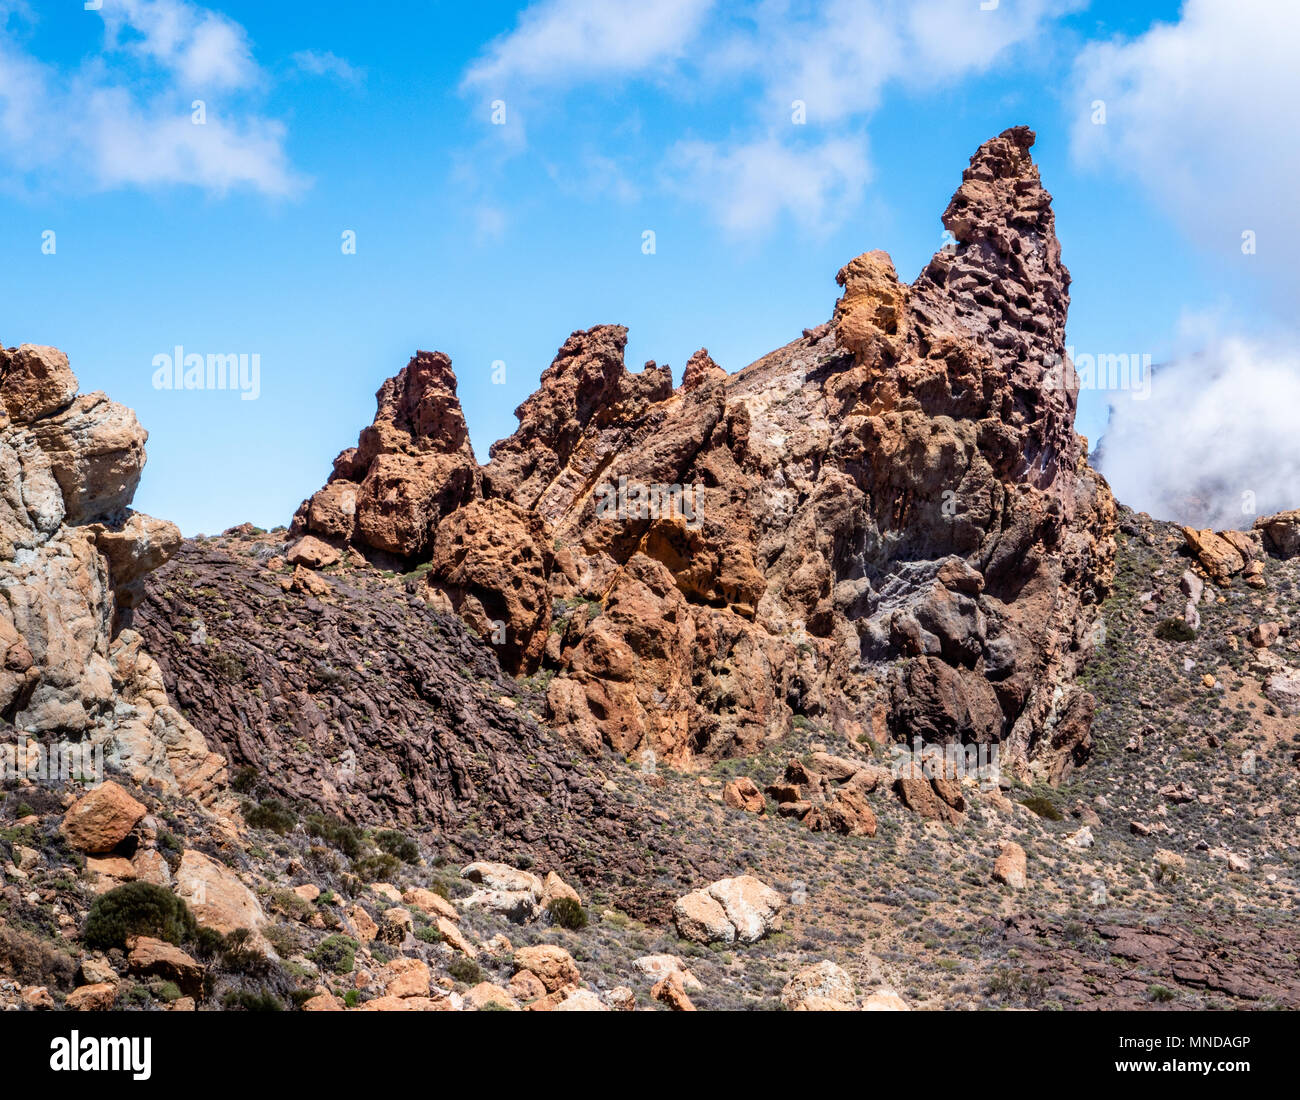 Fantastically eroded pinnacles of the Roques de Garcia in the Las Canadas caldera of Mount Teide on Tenerife in the Canary Islands Stock Photo